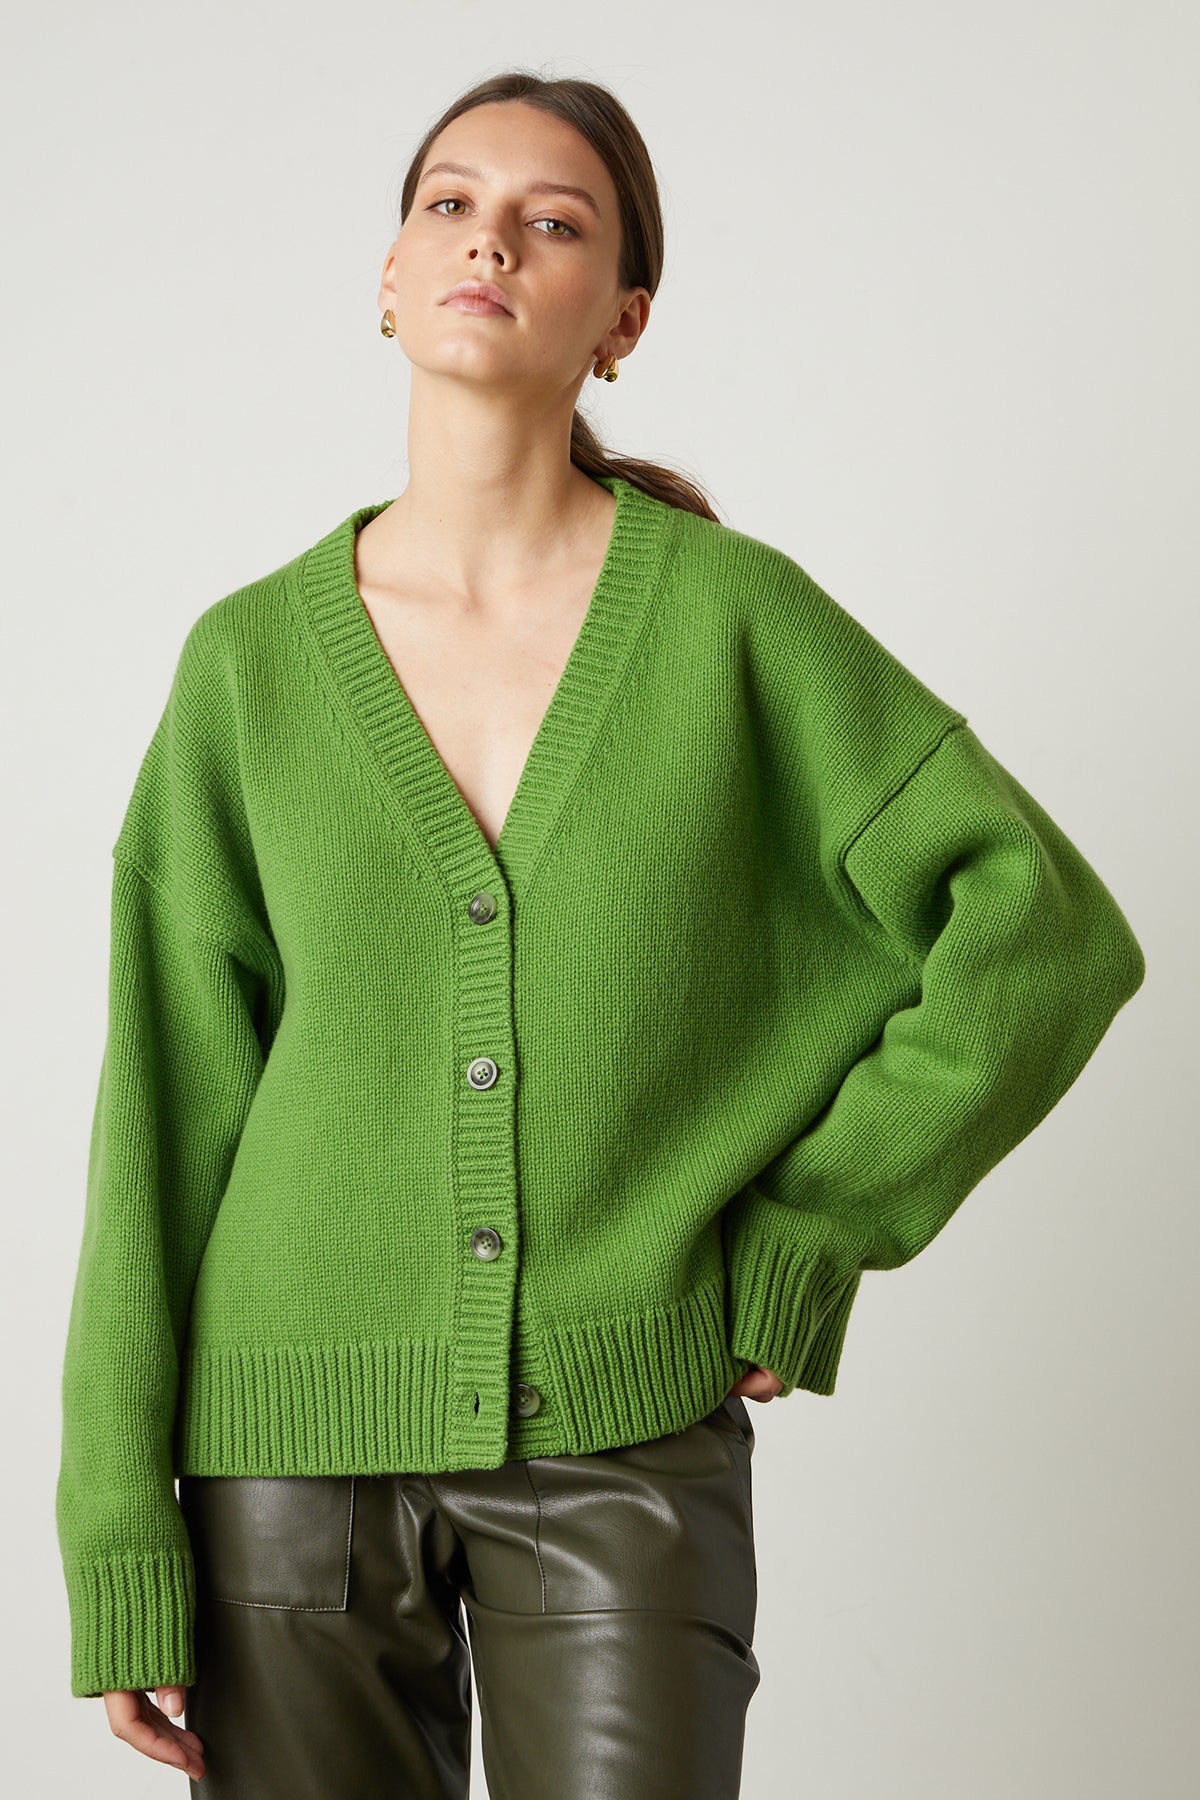   Aurora Button Front Cardigan in vibrant aloe green front with Rihanna Jogger  